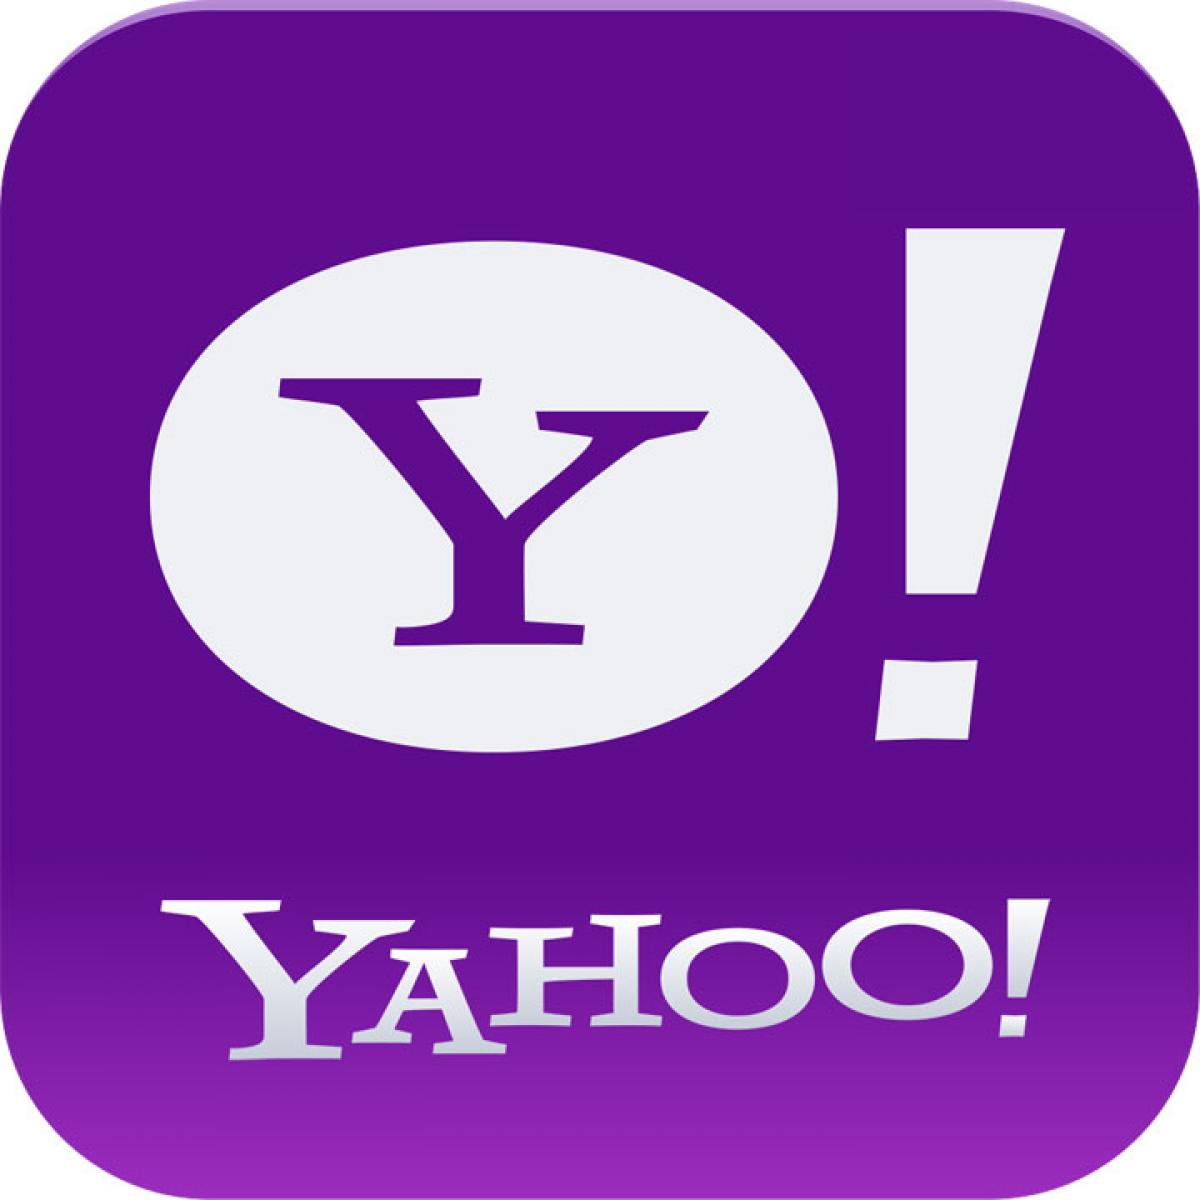 Now, Yahoo to notify users about hacking attacks